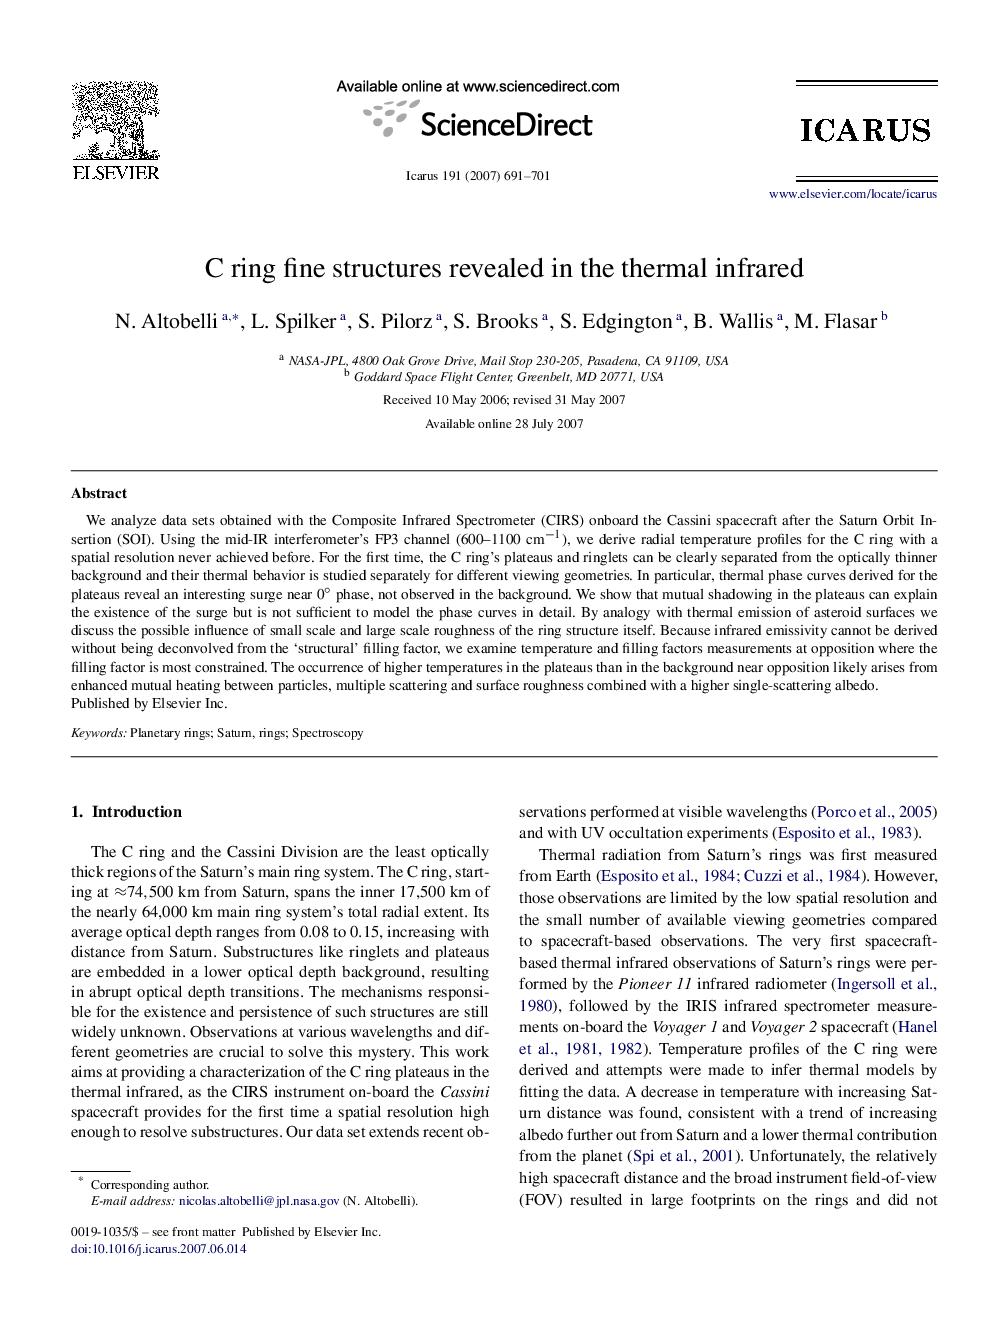 C ring fine structures revealed in the thermal infrared